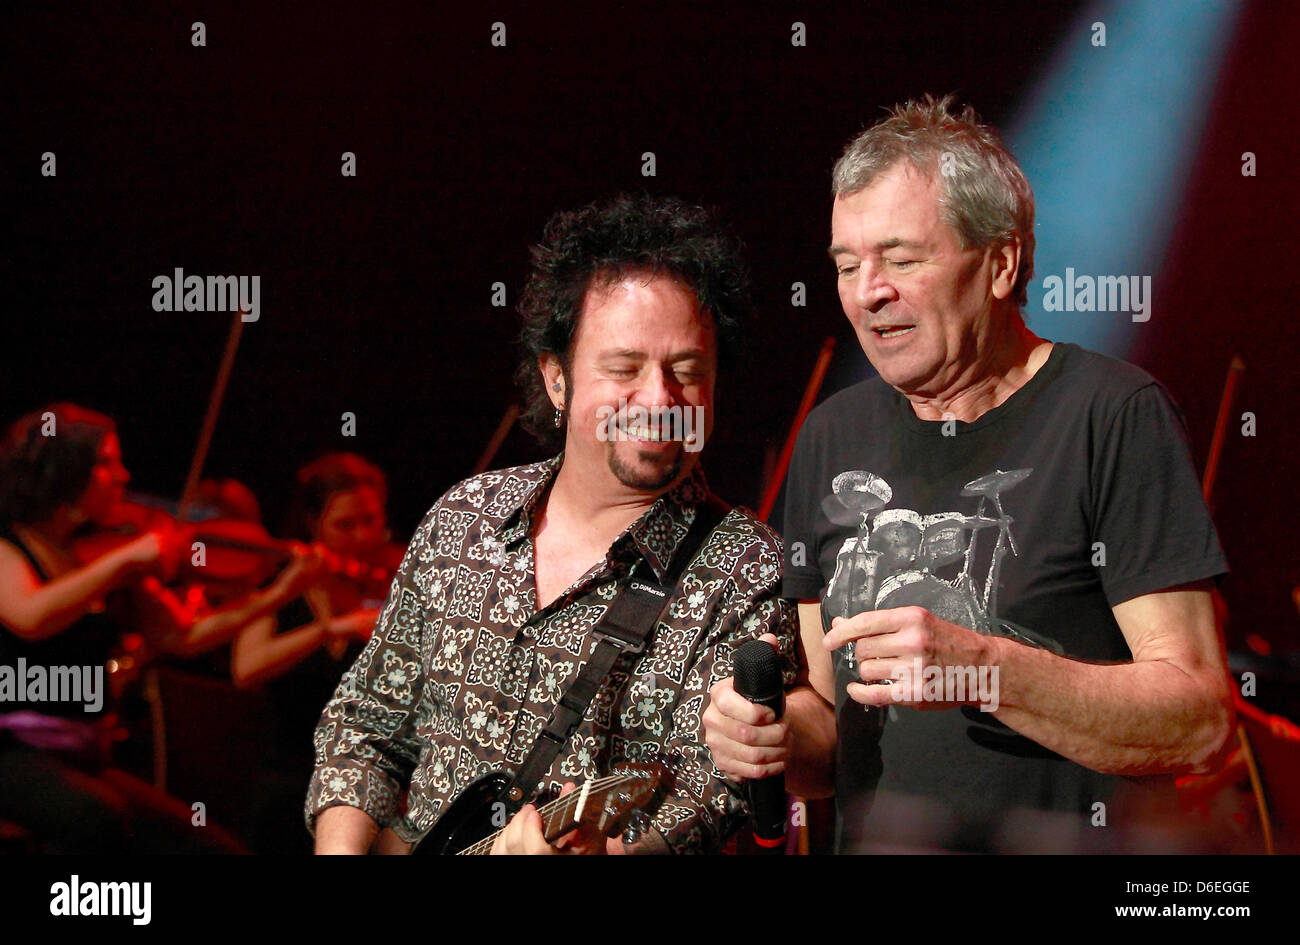 British Deep Purple singer Ian Gillan (R) and guitarrist of the US band Toto Steve Lukather perform on stage during the concert 'Rock meets Classic' at the Max-Schmeling-Halle in Berlin, Germany, 17 January 2012. Photo: Lutz Müller-Bohlen Stock Photo